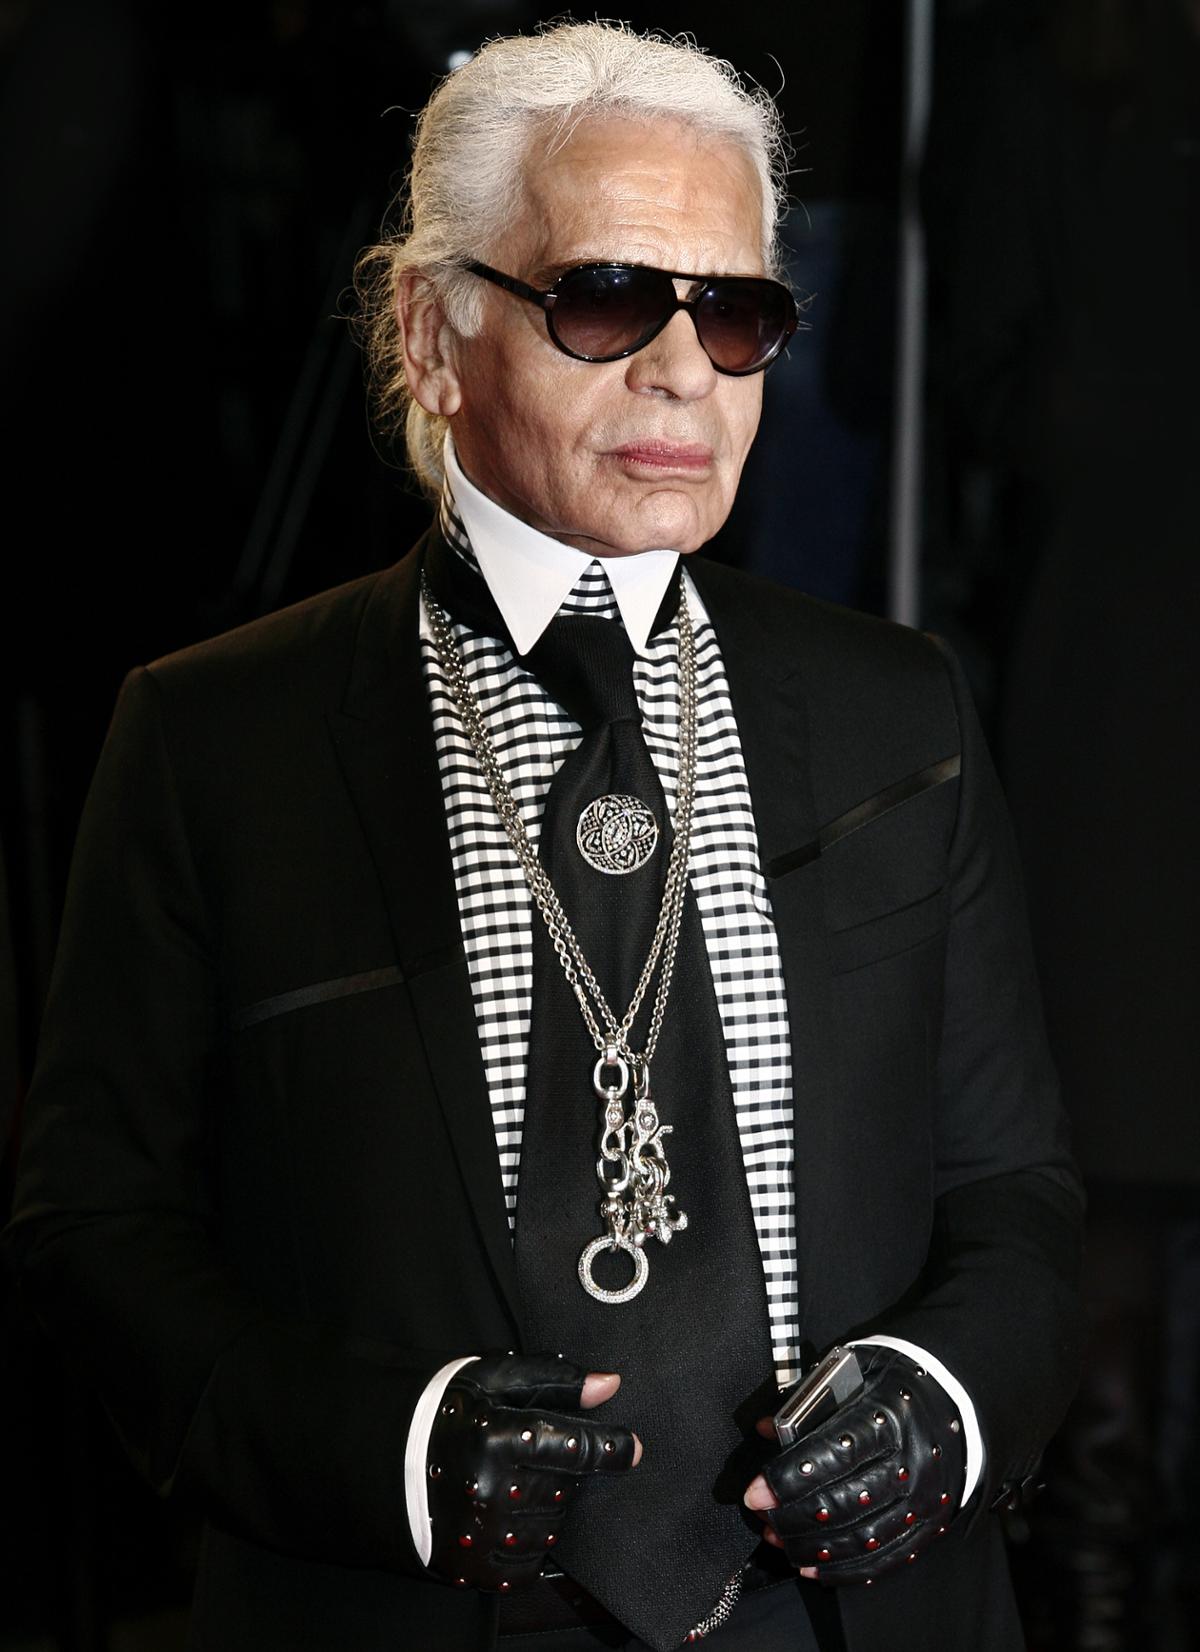 Karl Lagerfeld worked with major global fashion brands including Balmain, Chanel, Fendi and Valentino / Shutterstock/Andrea Raffin